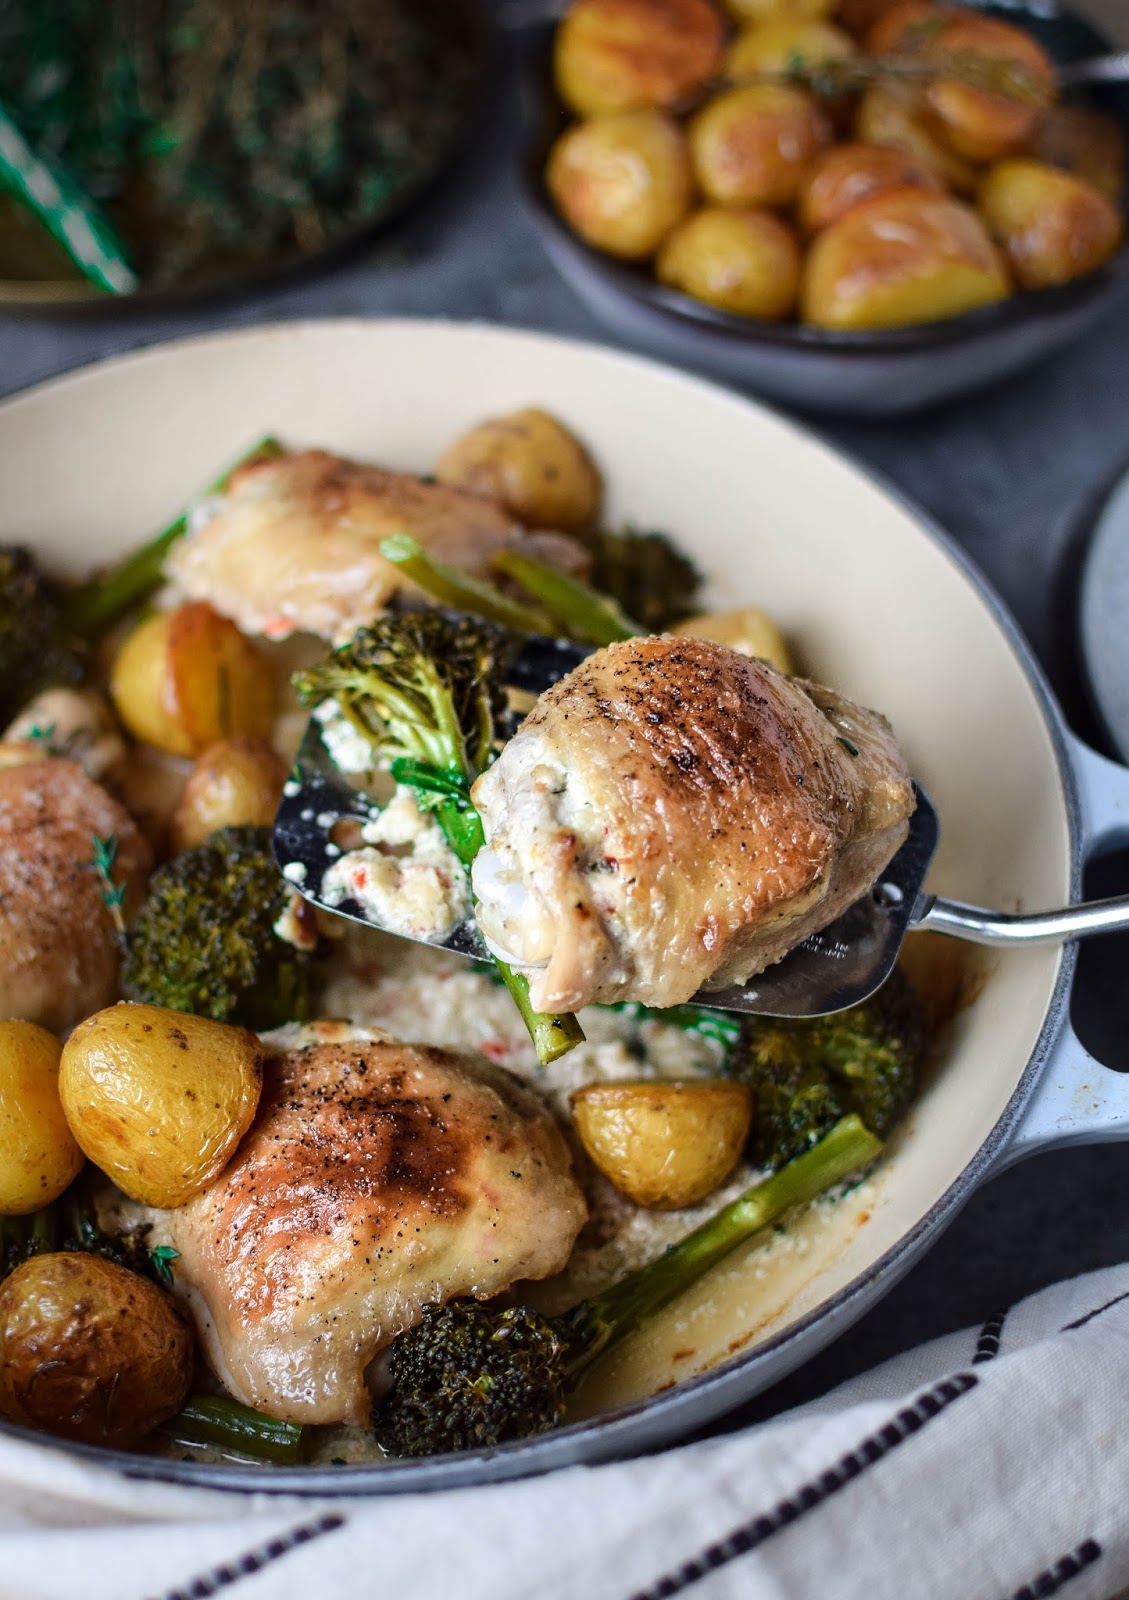 These blue cheese and chilli stuffed chicken thighs are the ultimate weekend lunch dish. This one pan recipe is super simple to throw together without scrimping on taste. Serve with some roasted new potatoes for a decadent treat.